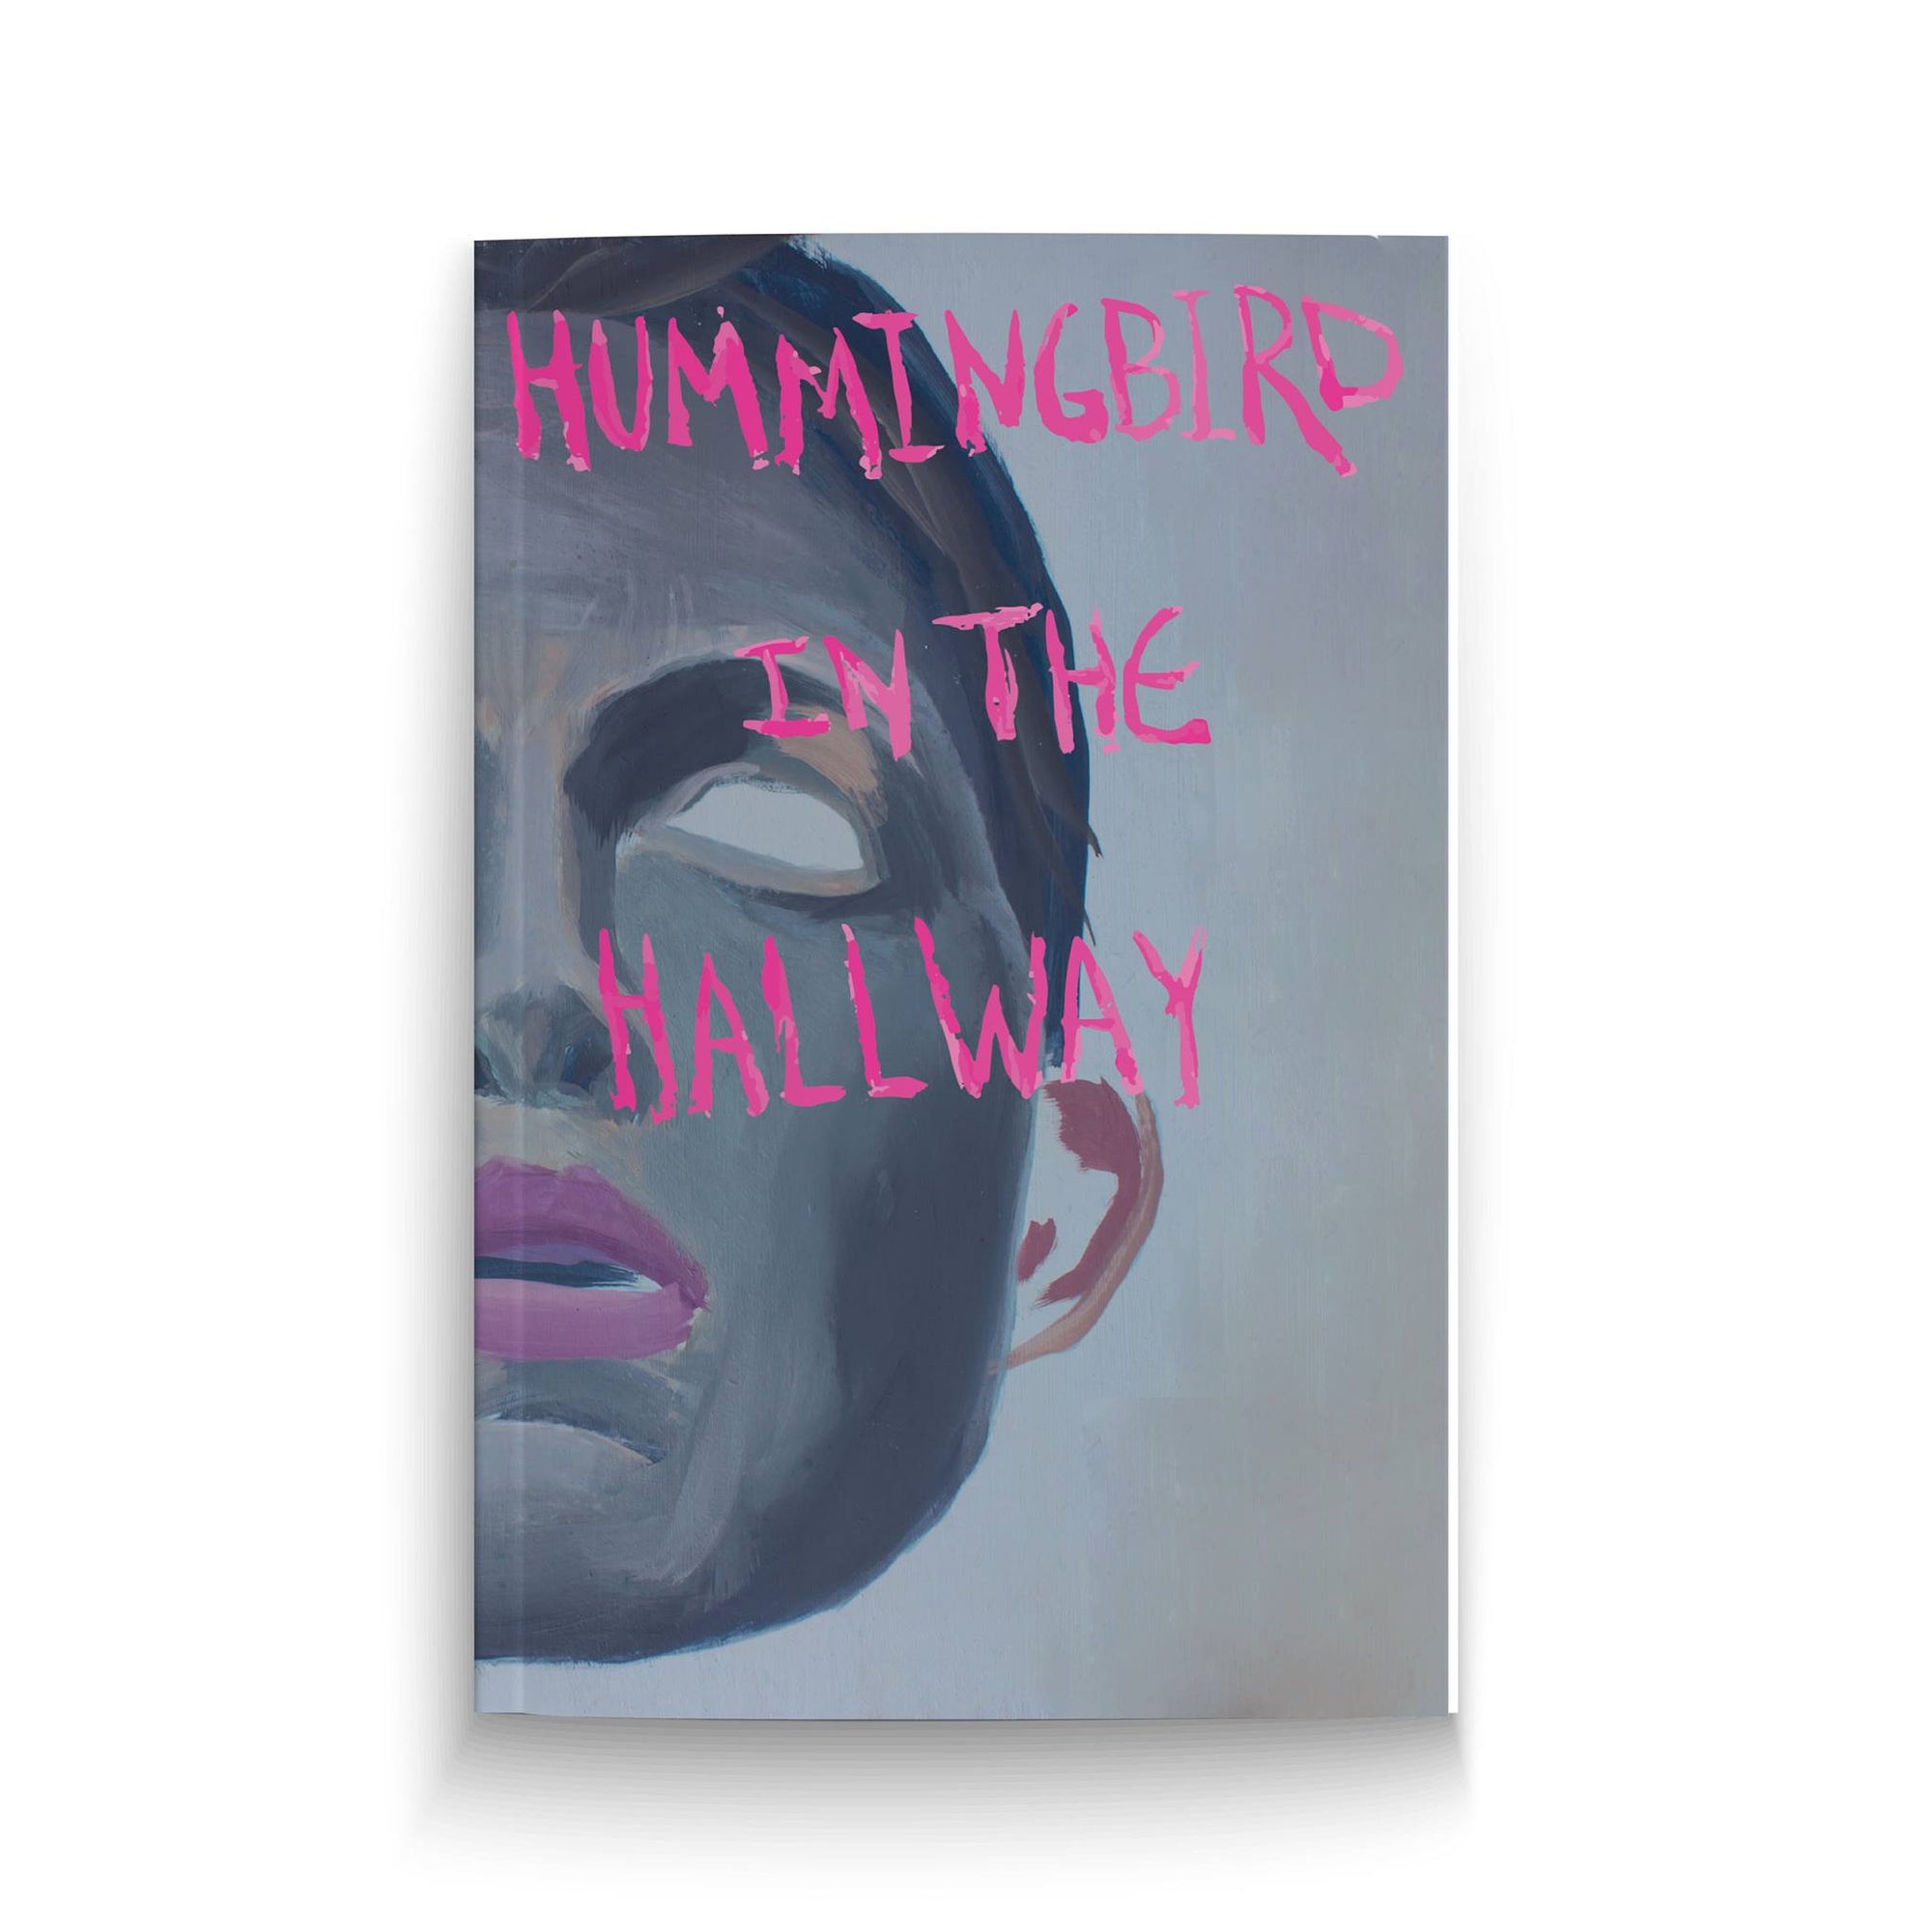 'Hummingbird in the Hallway' Softcover Book